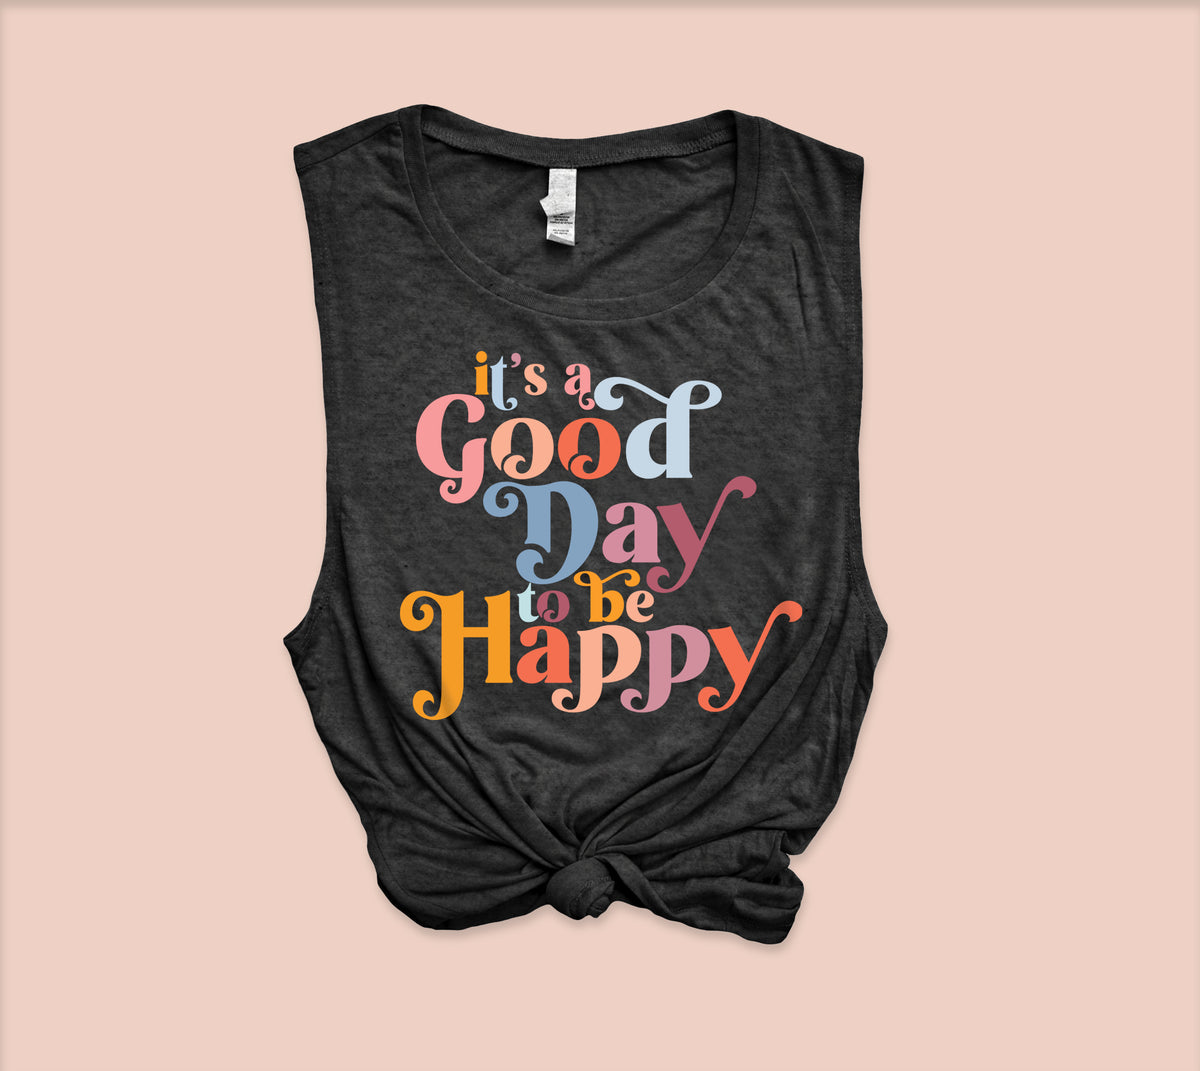 Black muscle tank that says it's a good day to be happy - HighCiti